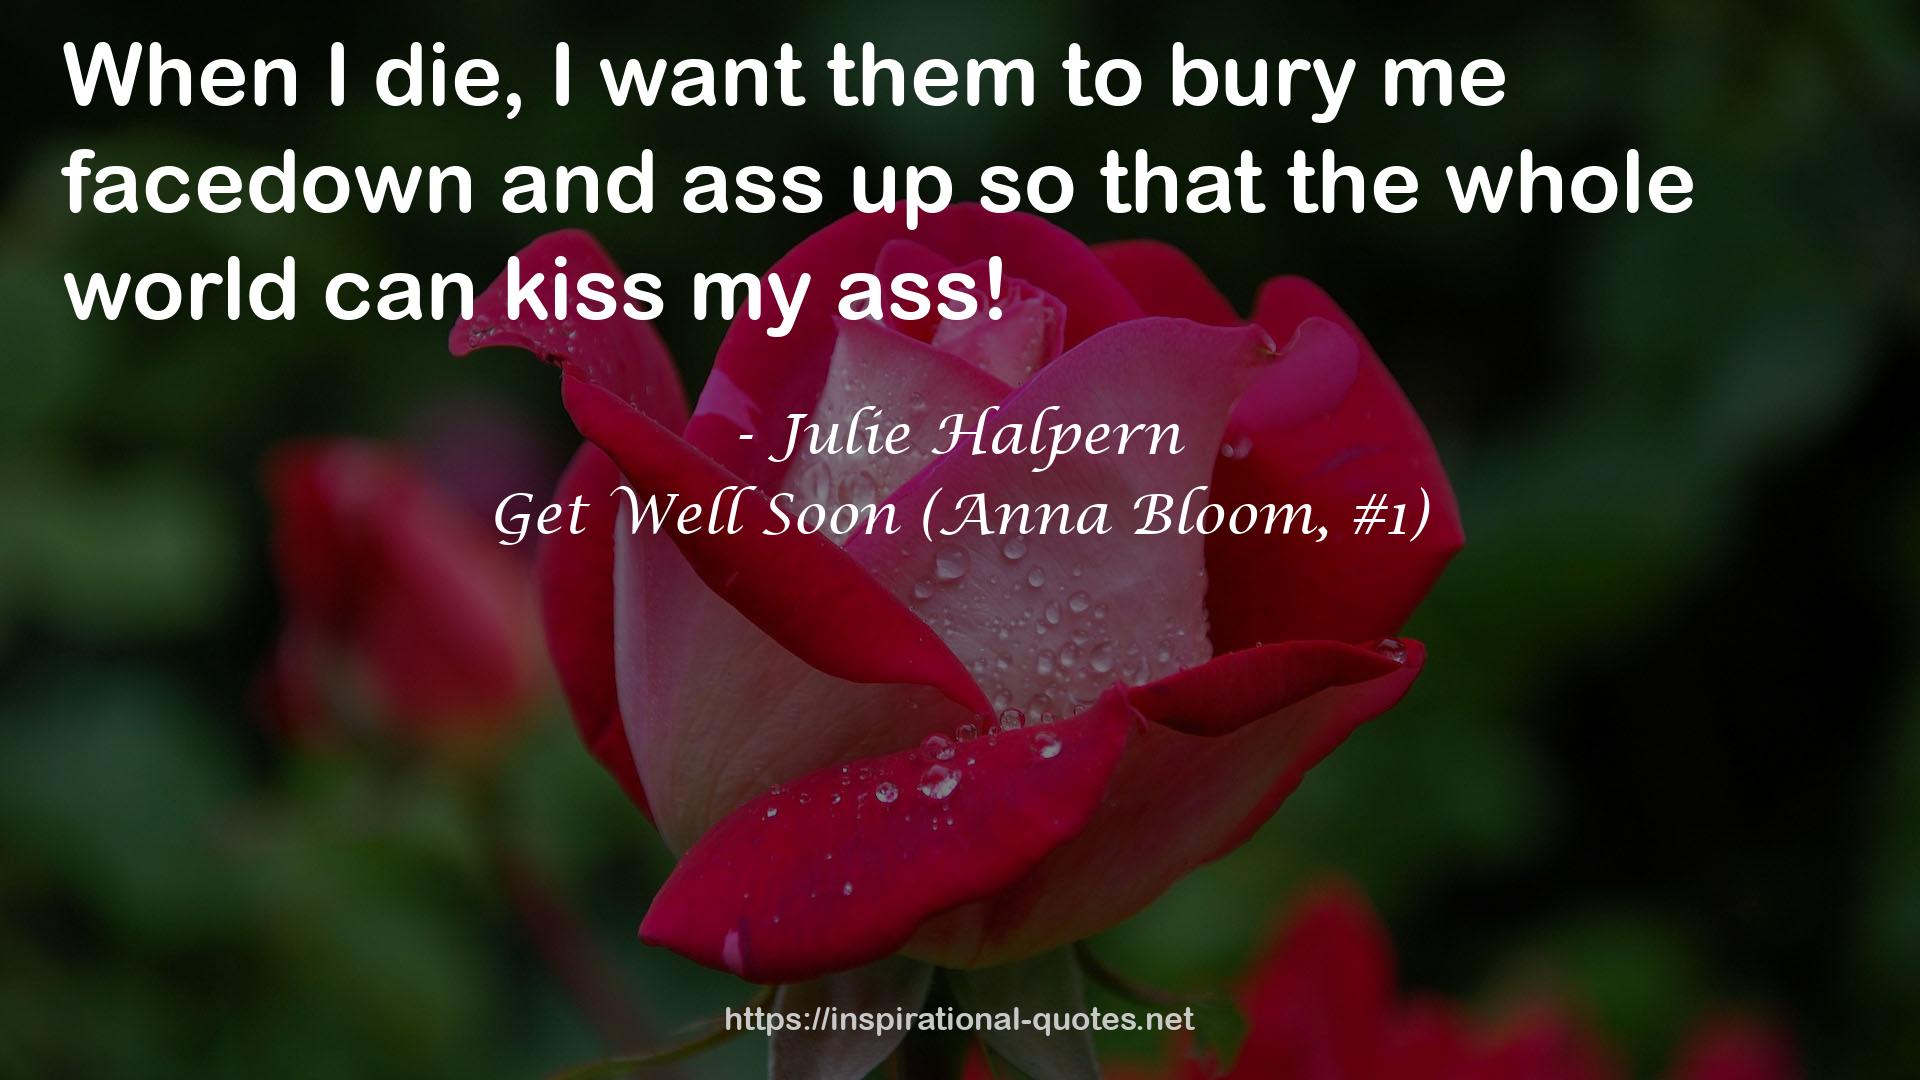 Get Well Soon (Anna Bloom, #1) QUOTES